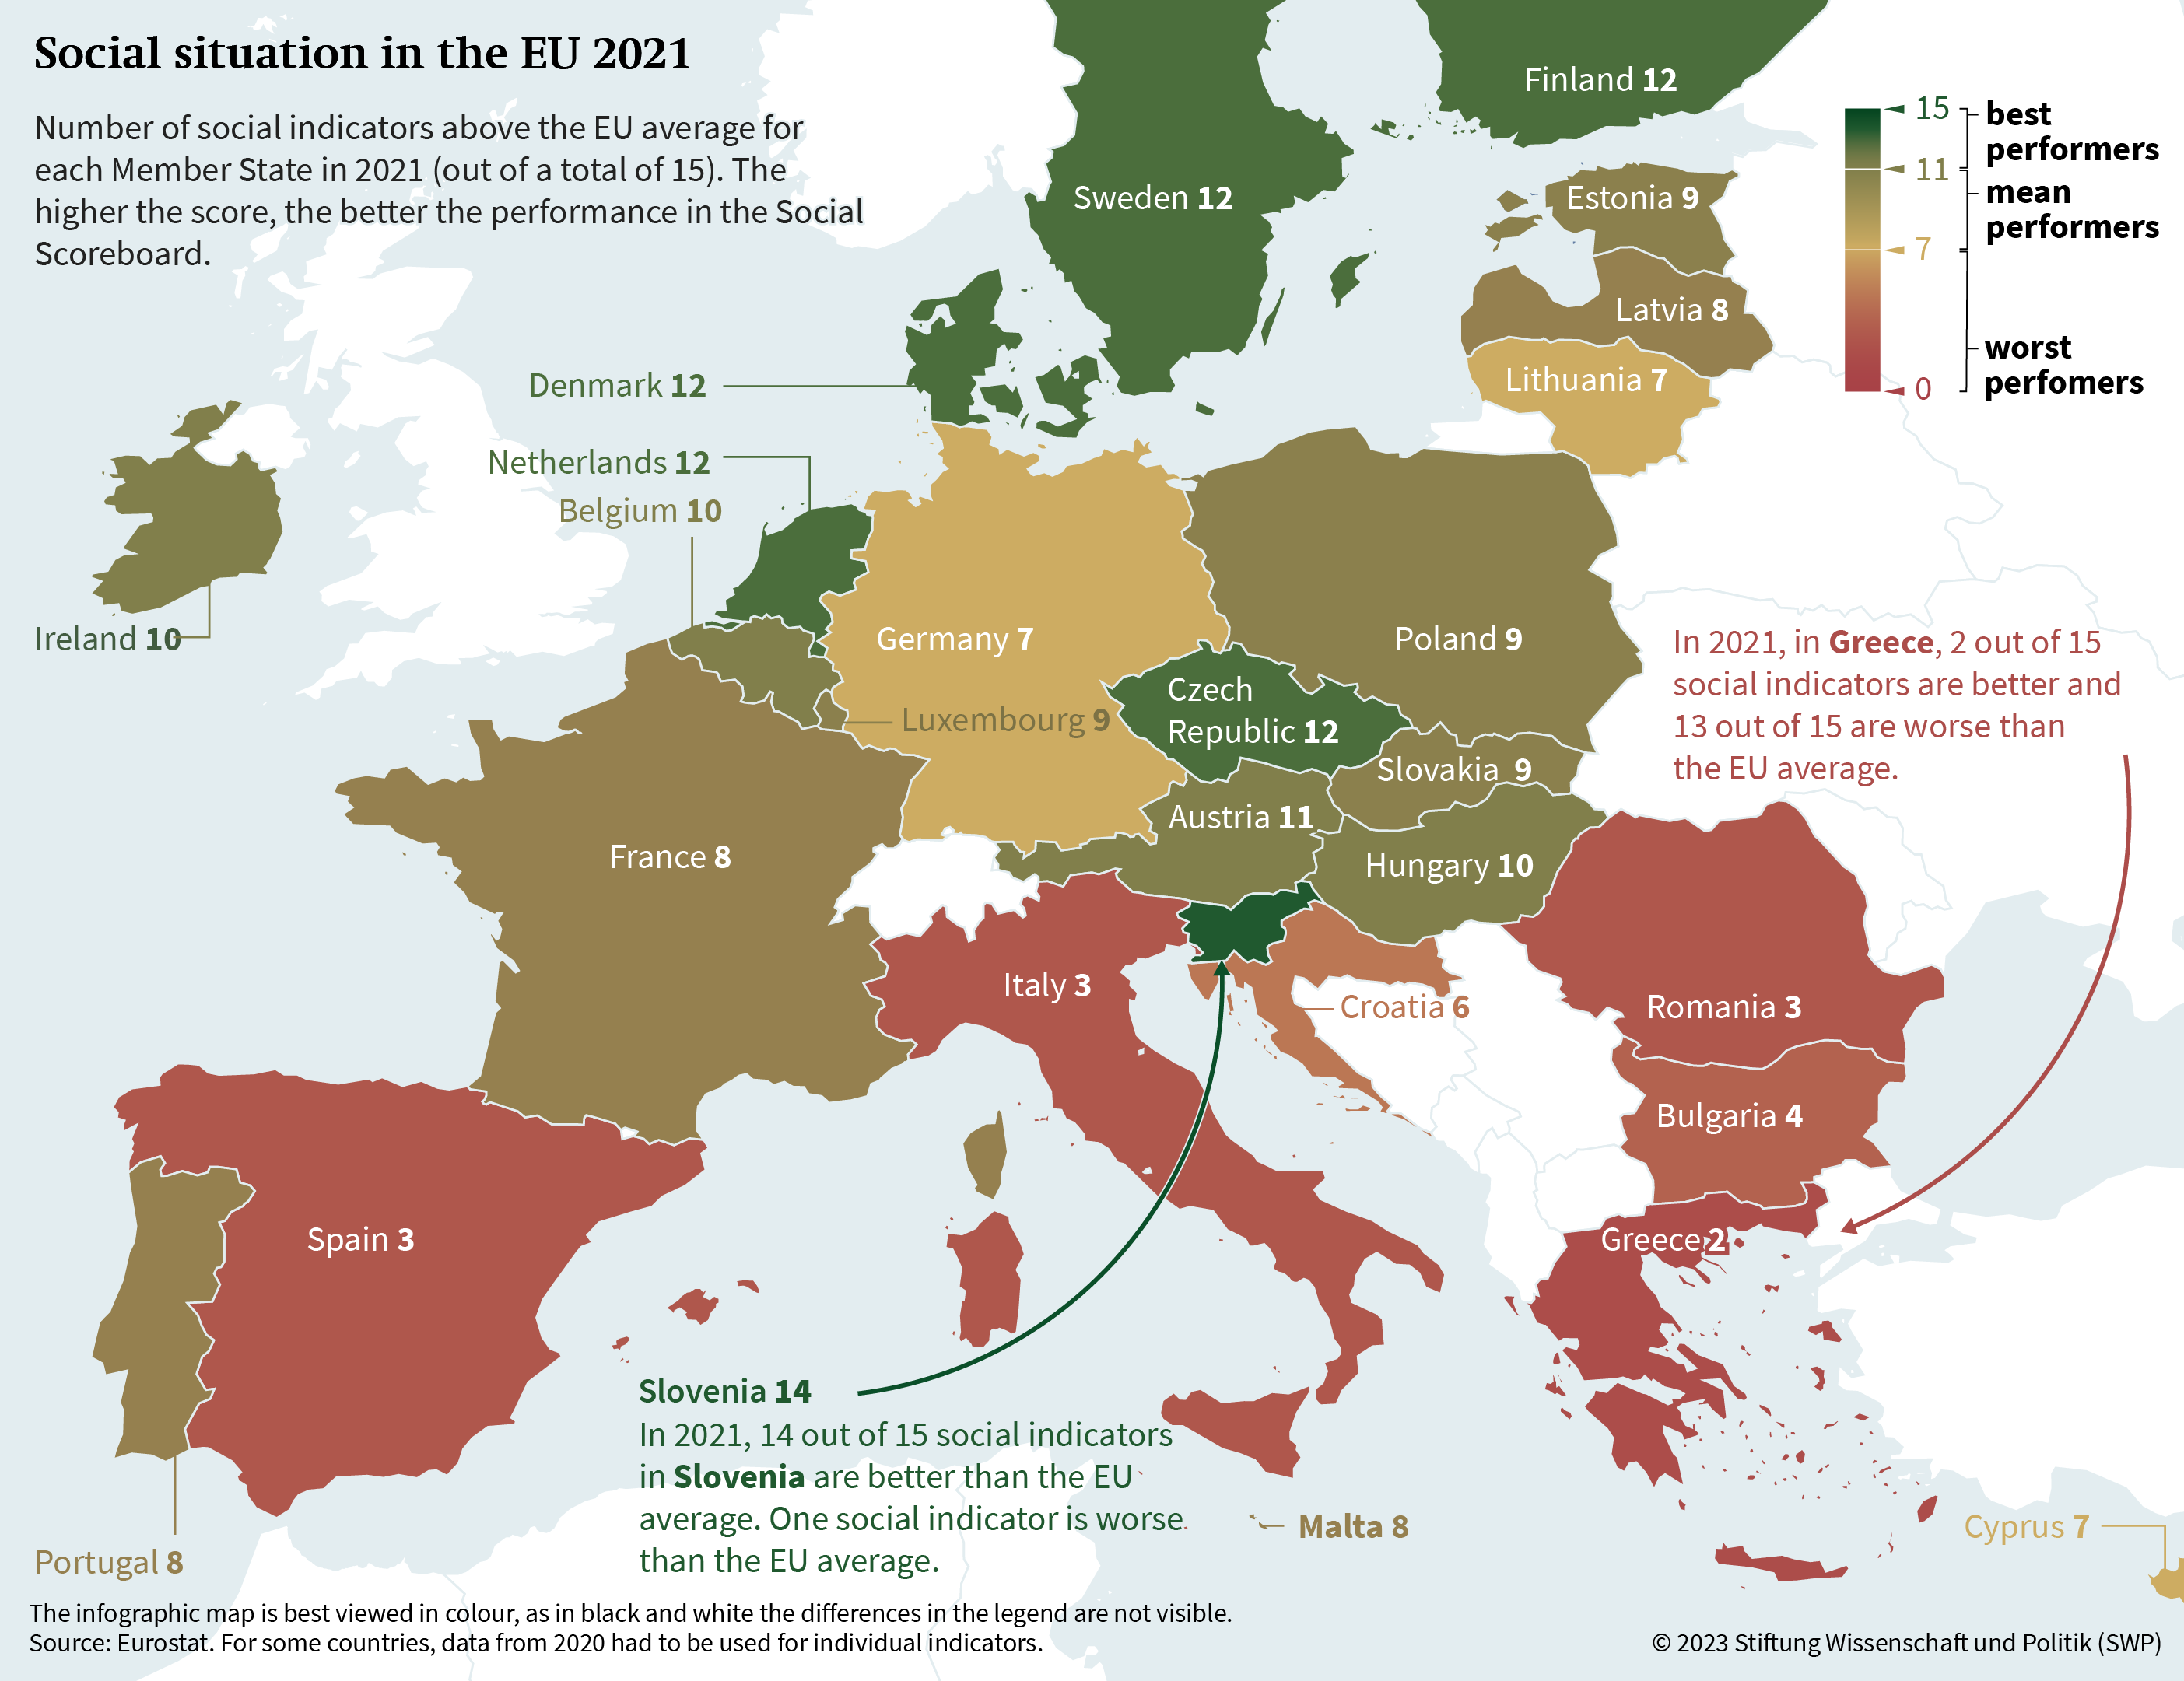 Figure 1: Social situation in the EU 2021